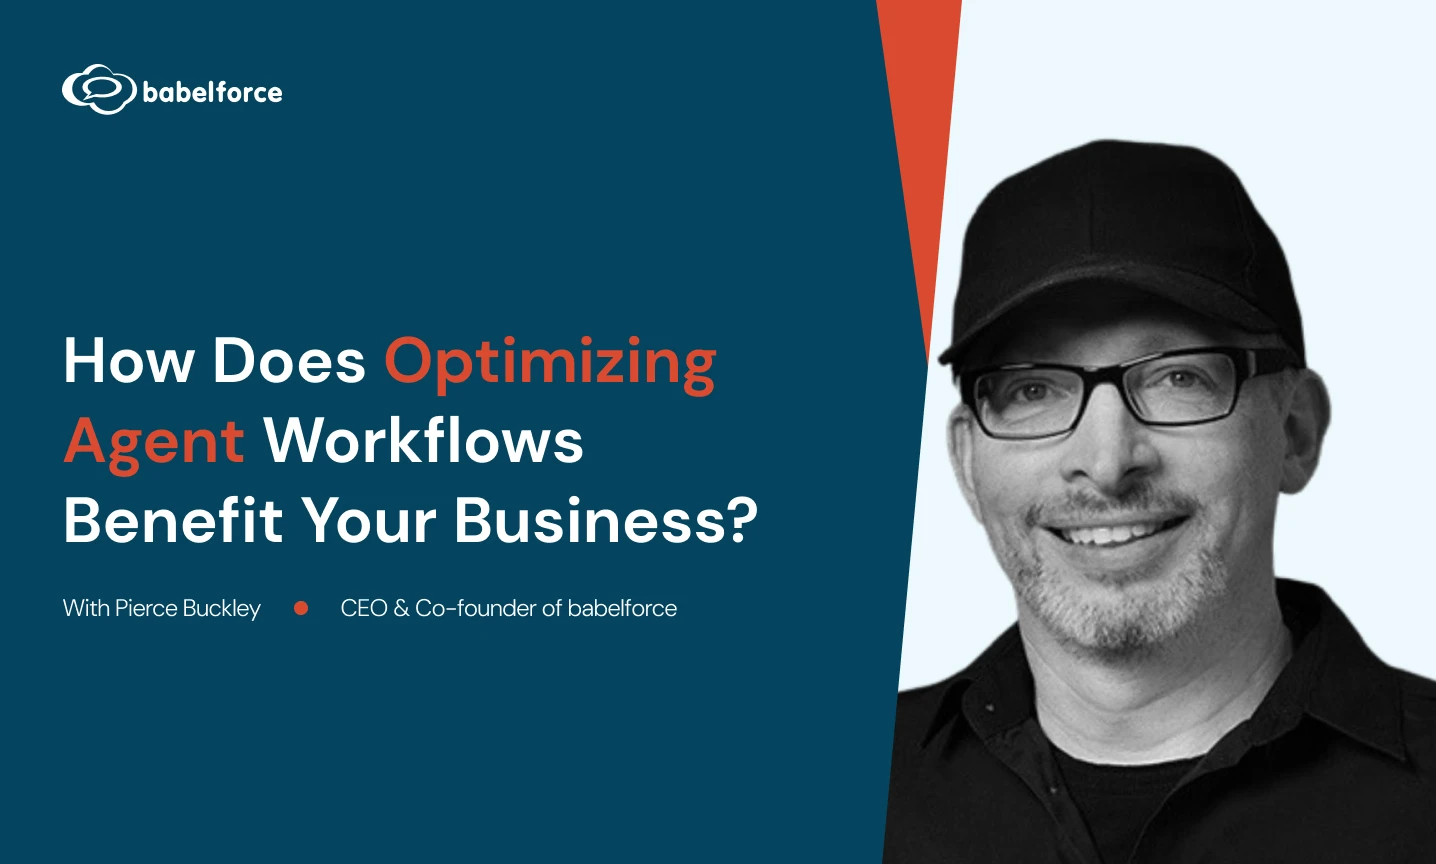 How Does Optimizing Agent Workflows Benefit Your Business?